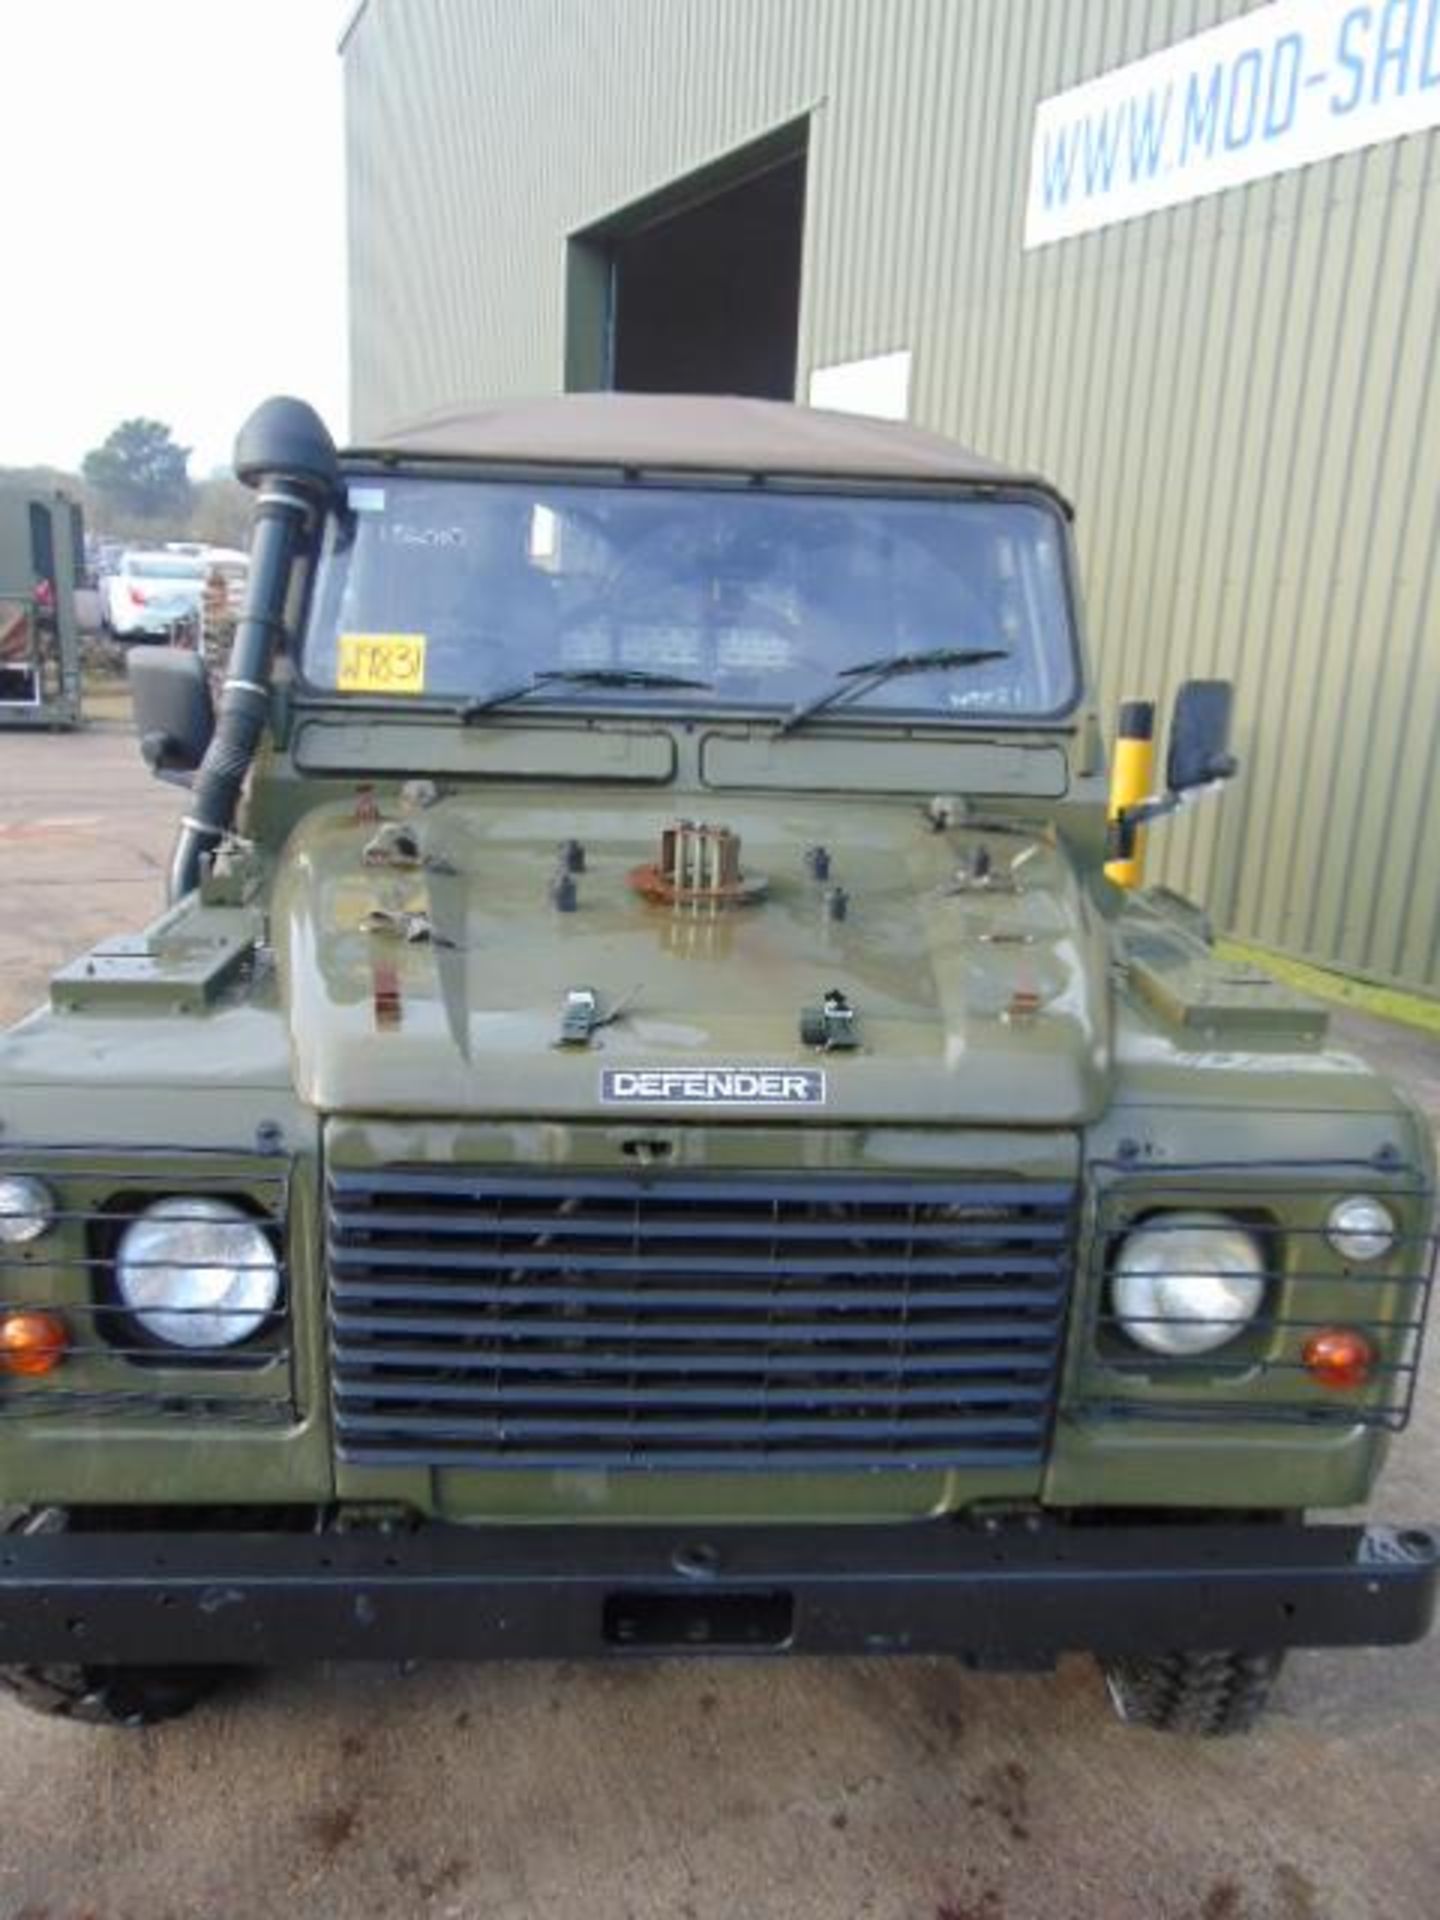 Military Specification Land Rover Wolf 110 Soft Top FFR - Image 2 of 25